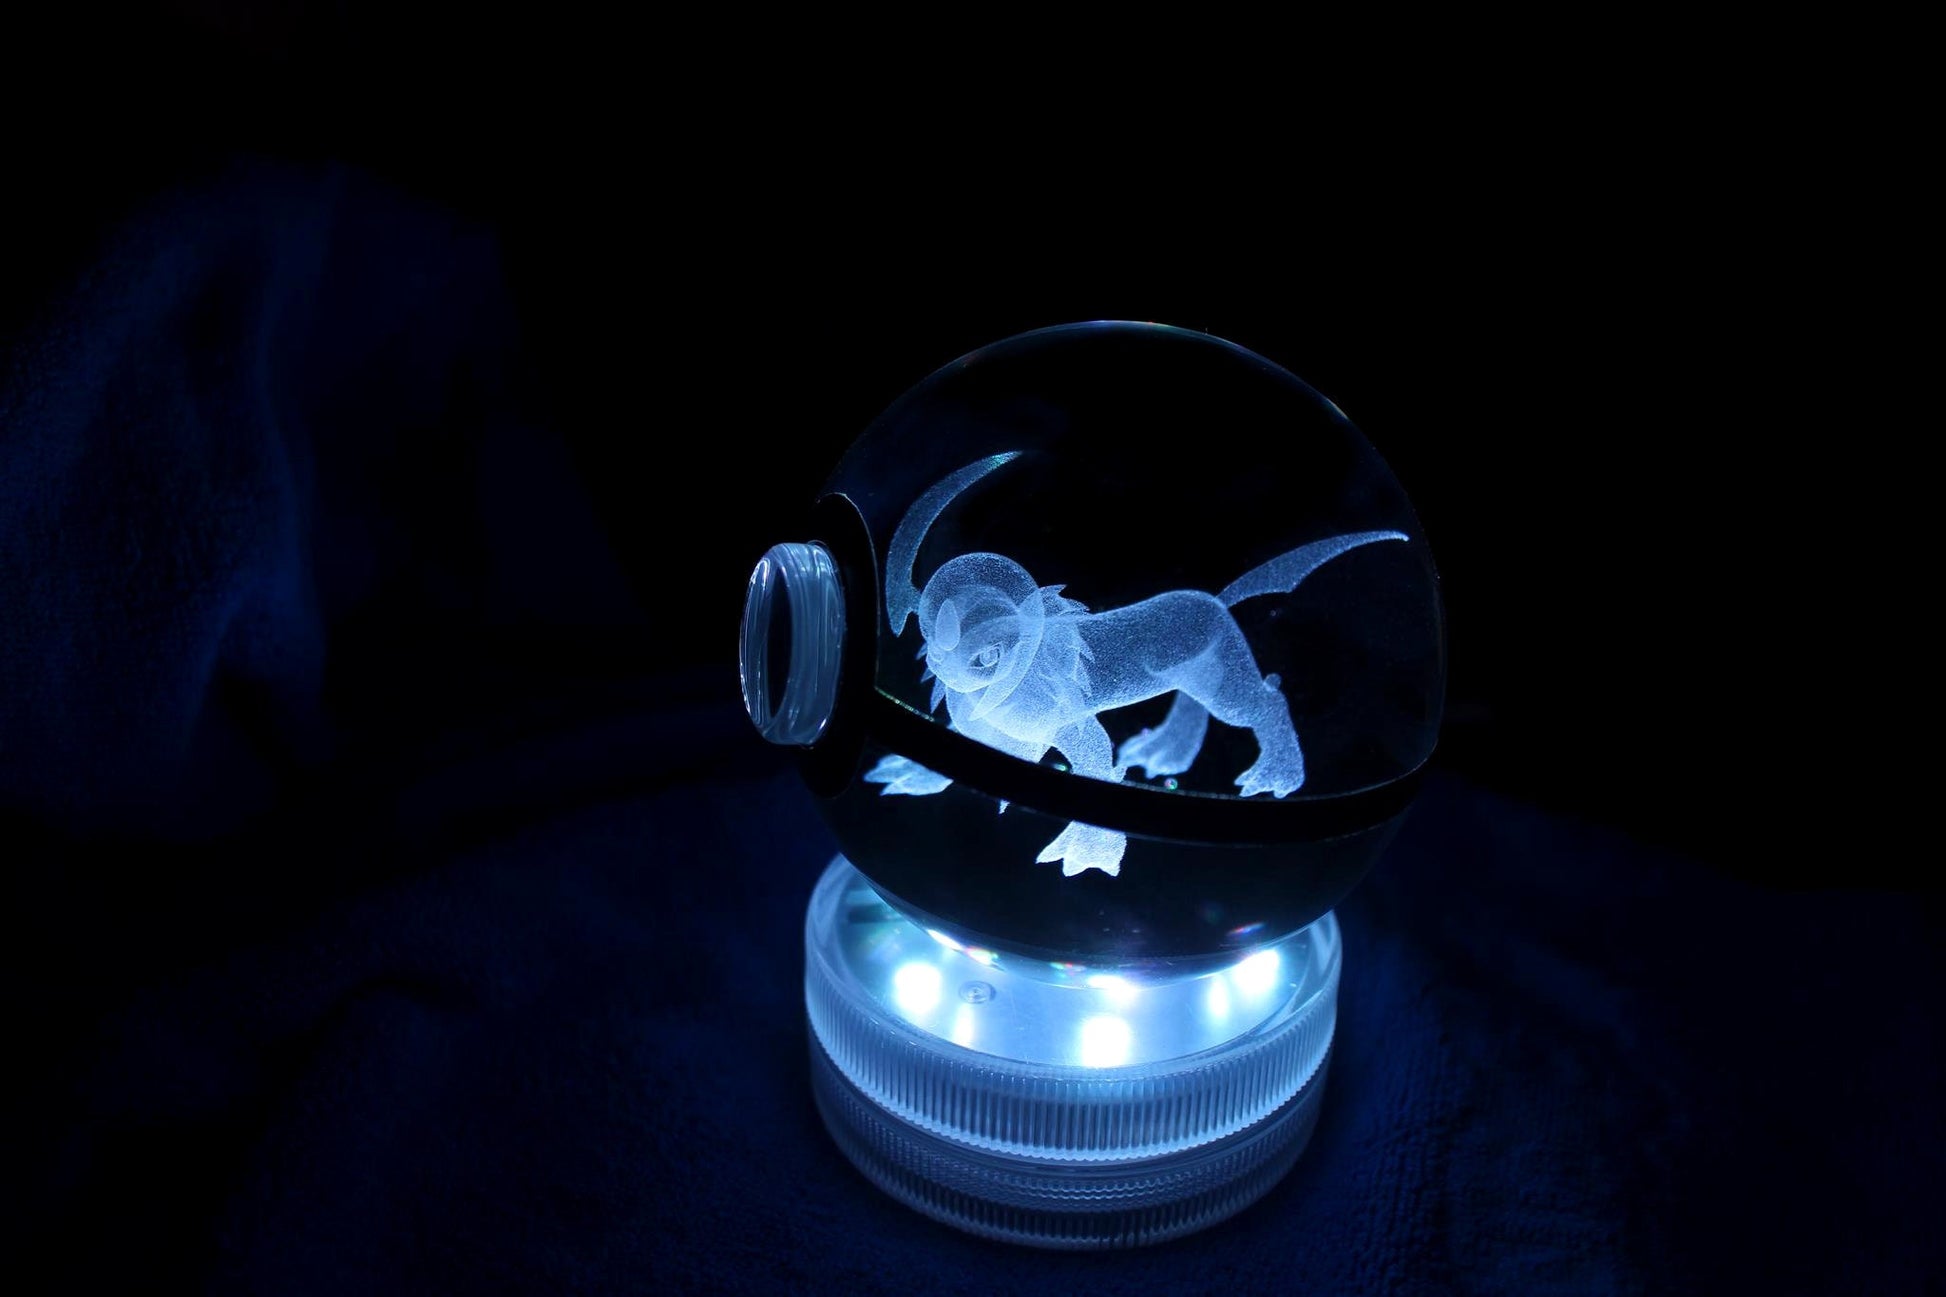 Absol Crystal Pokeball on Remote controlled LED base, high angle.